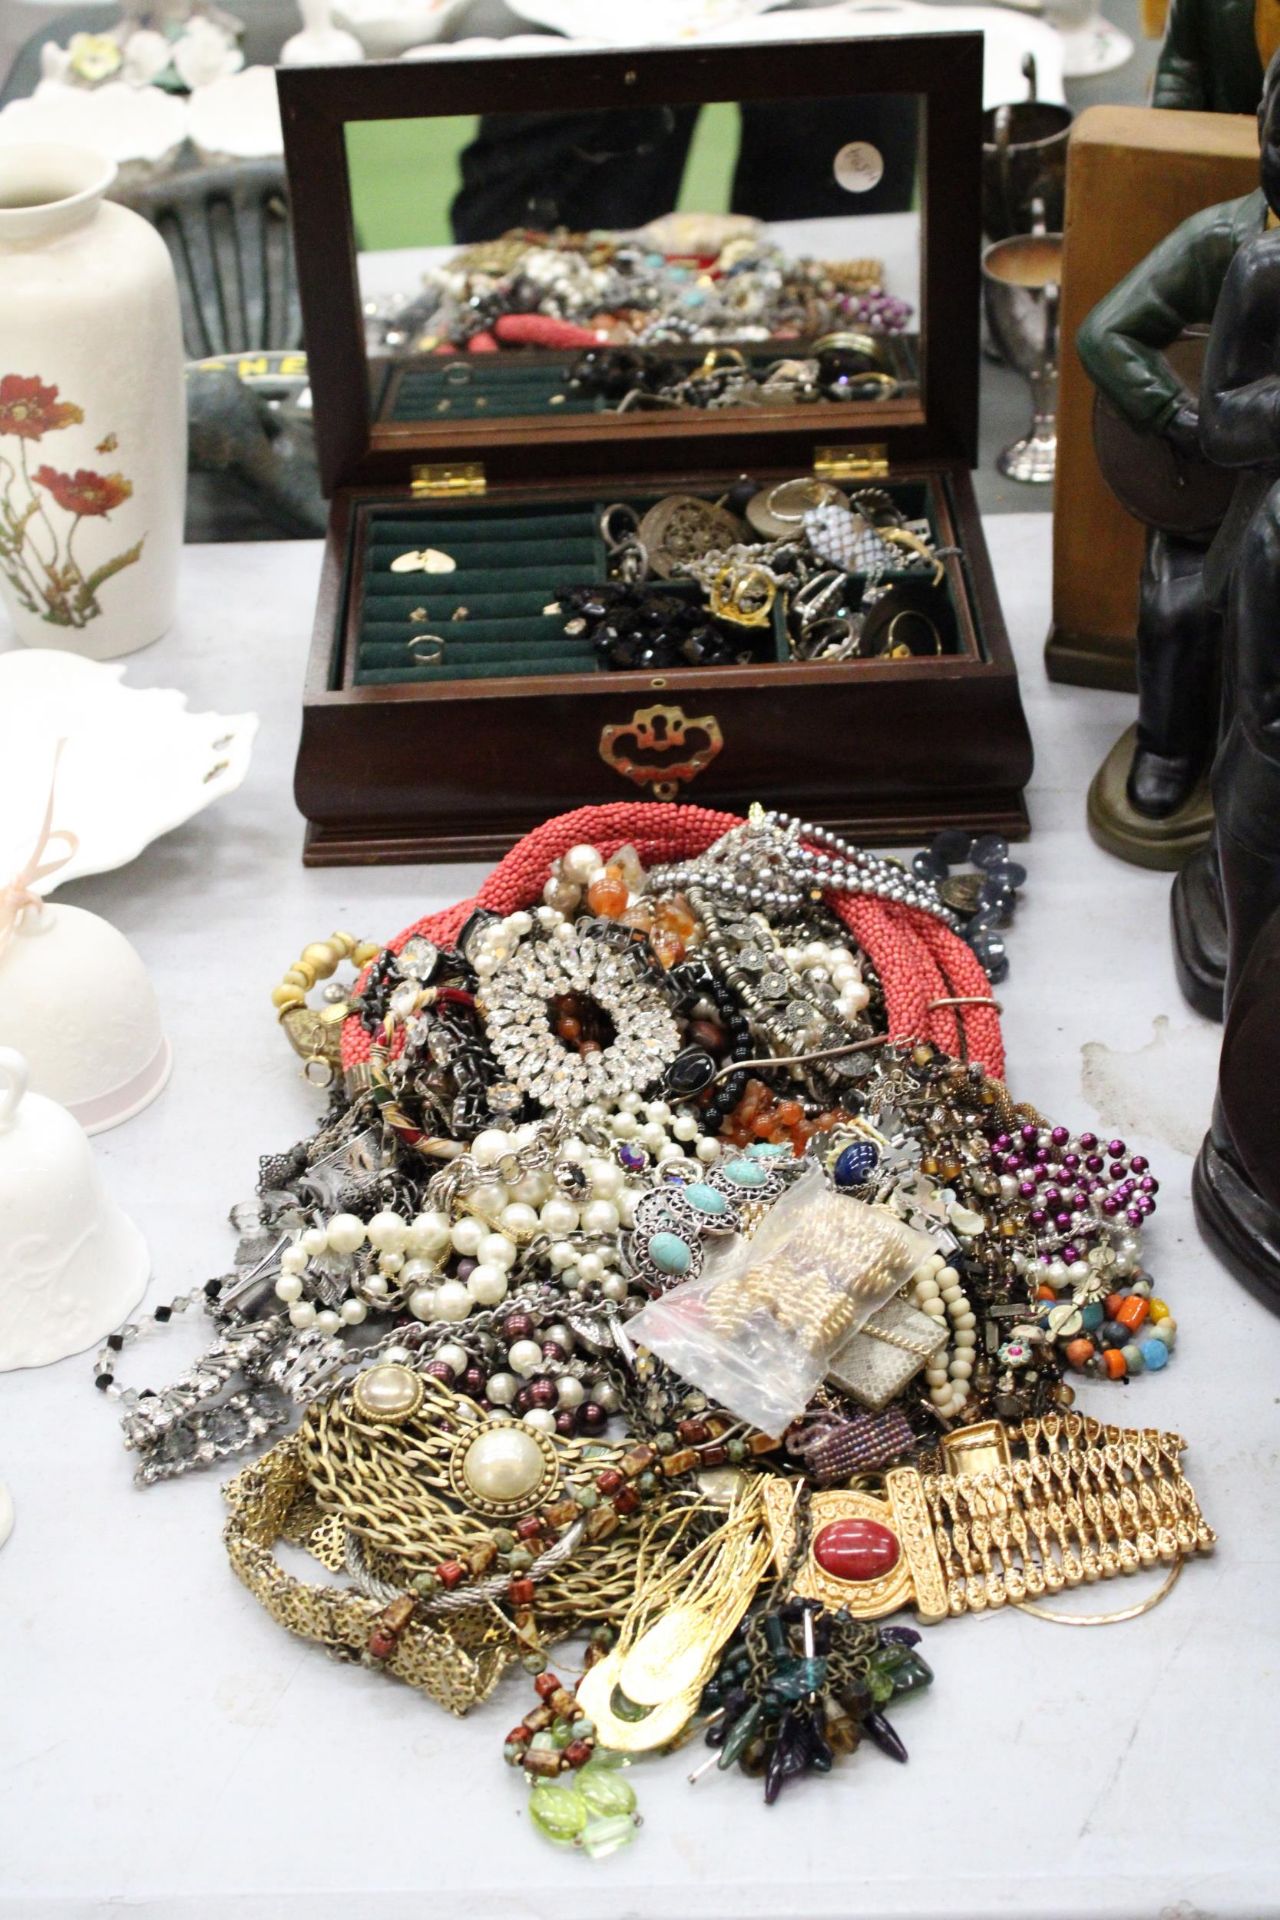 A LARGE MIXED LOT OF JEWELLERY TO INCLUDE EARINGS, BROOCHES, NECKLACES ETC PLUS A JEWELLERY BOX